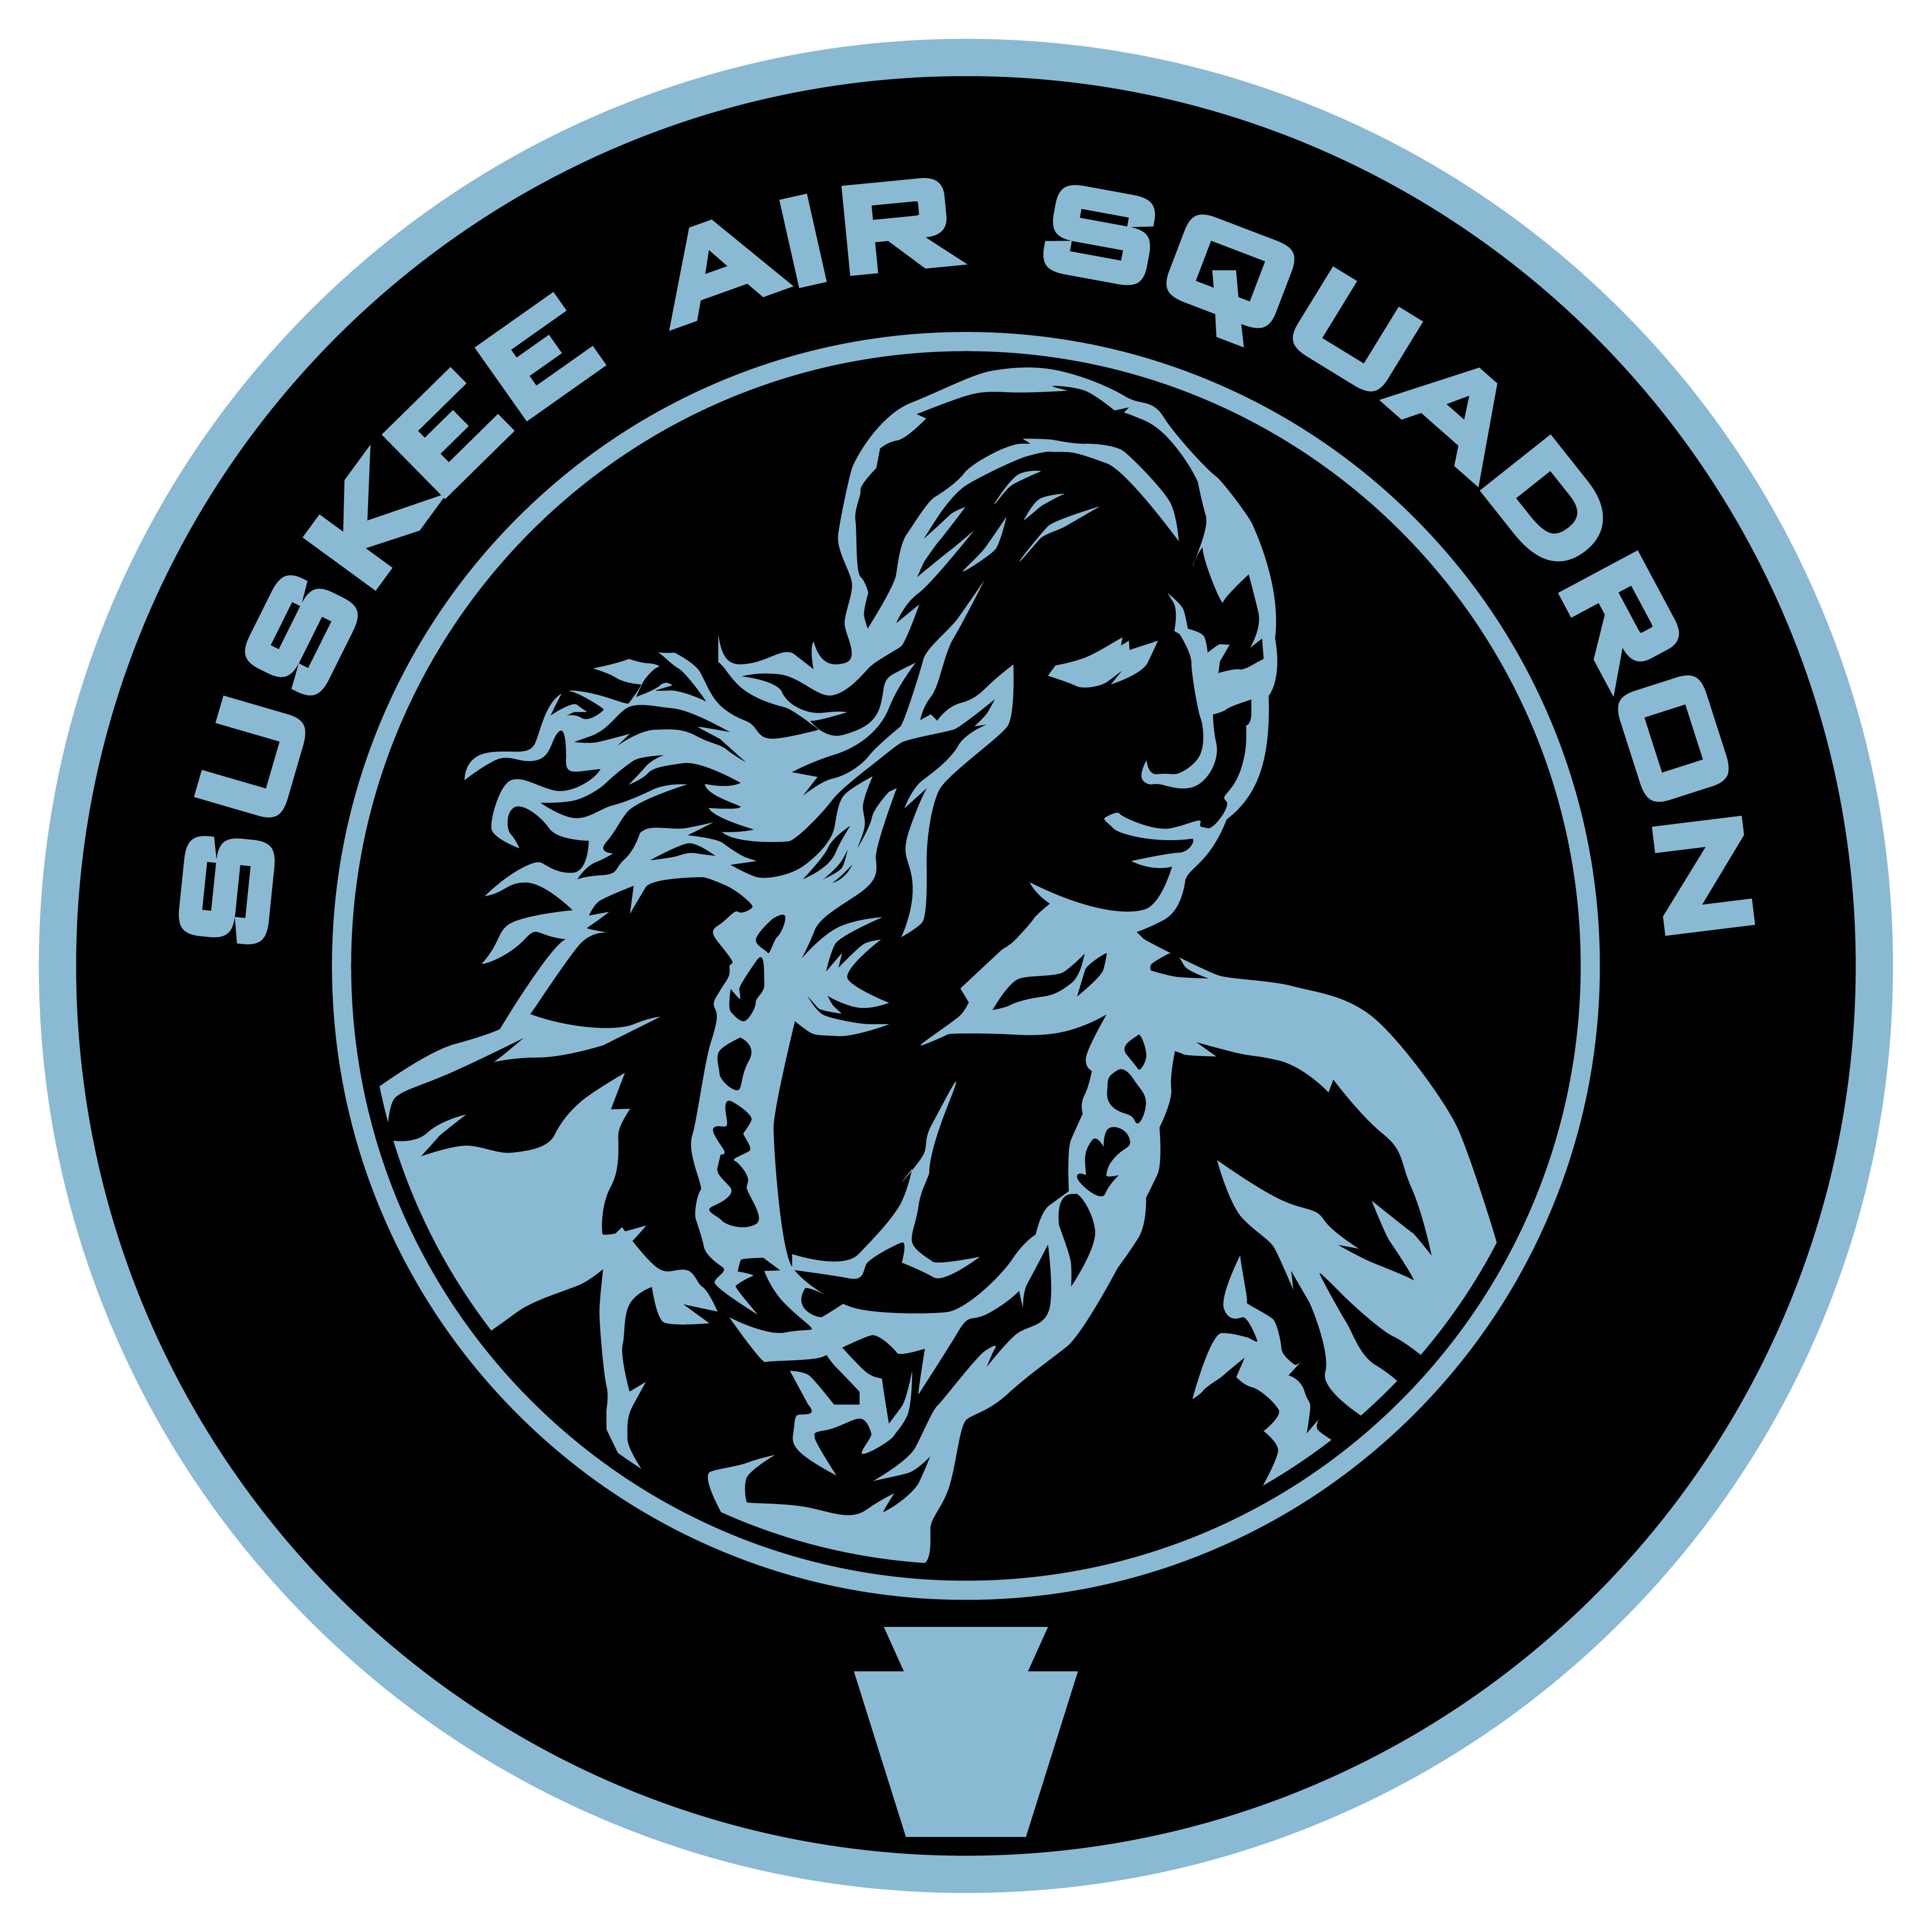 SUSKEE AIR SQUADRON